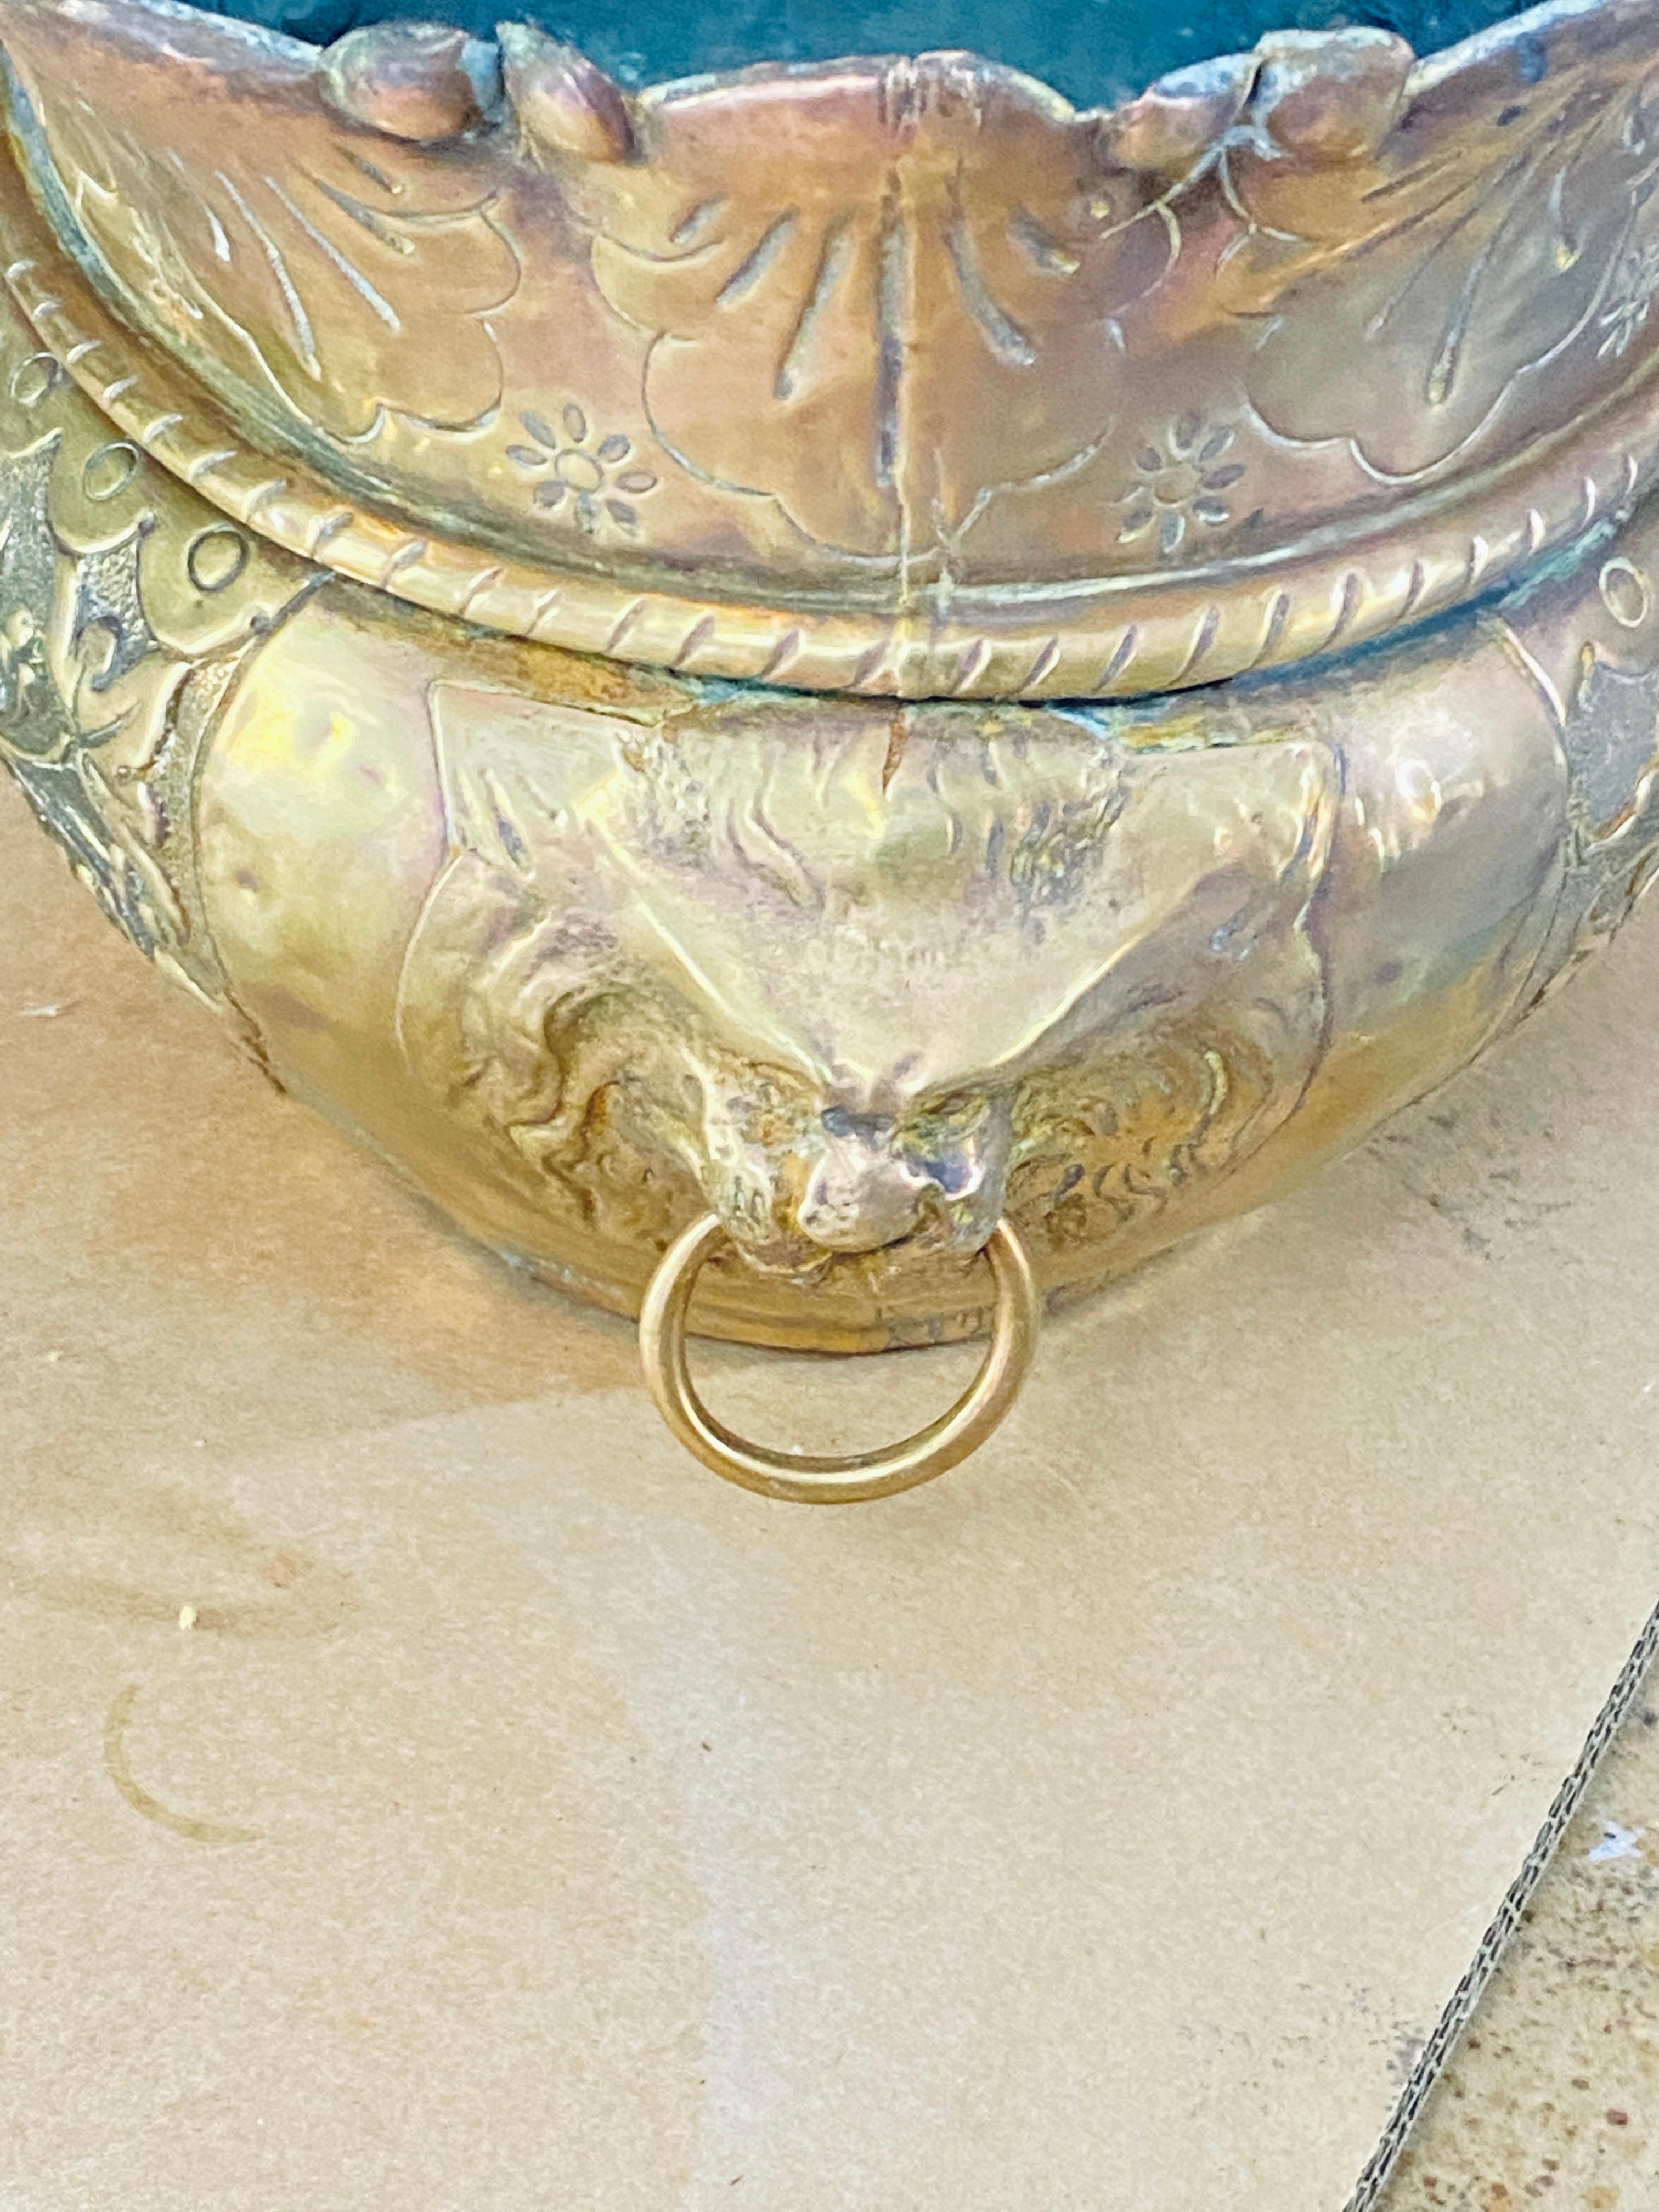 19th century French brass planter. The color is golden, and we have lion heads in decorative motifs. It's a rather baroque decor, which reveals the old patina of the brass.